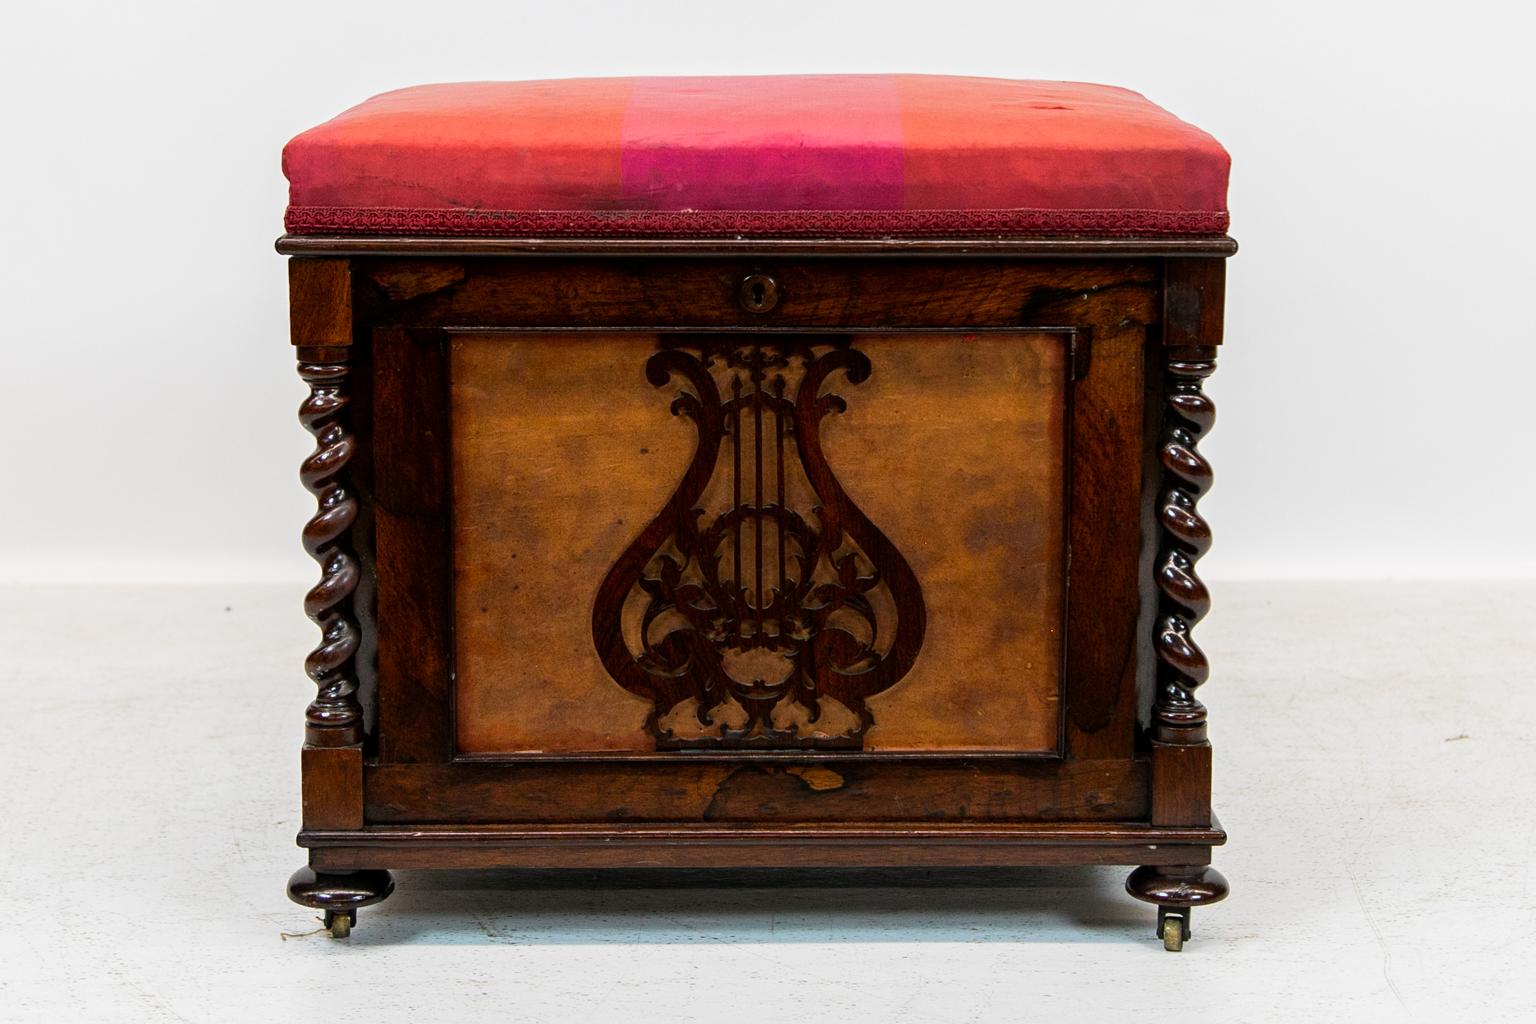 English Rosewood bench, has a carved reticulated lyre on the front and a reticulated carved arabesque on the sides. There are carved barley twist columns on the corners terminating in mushroom feet. The fabric is consistent with wear and age.
 